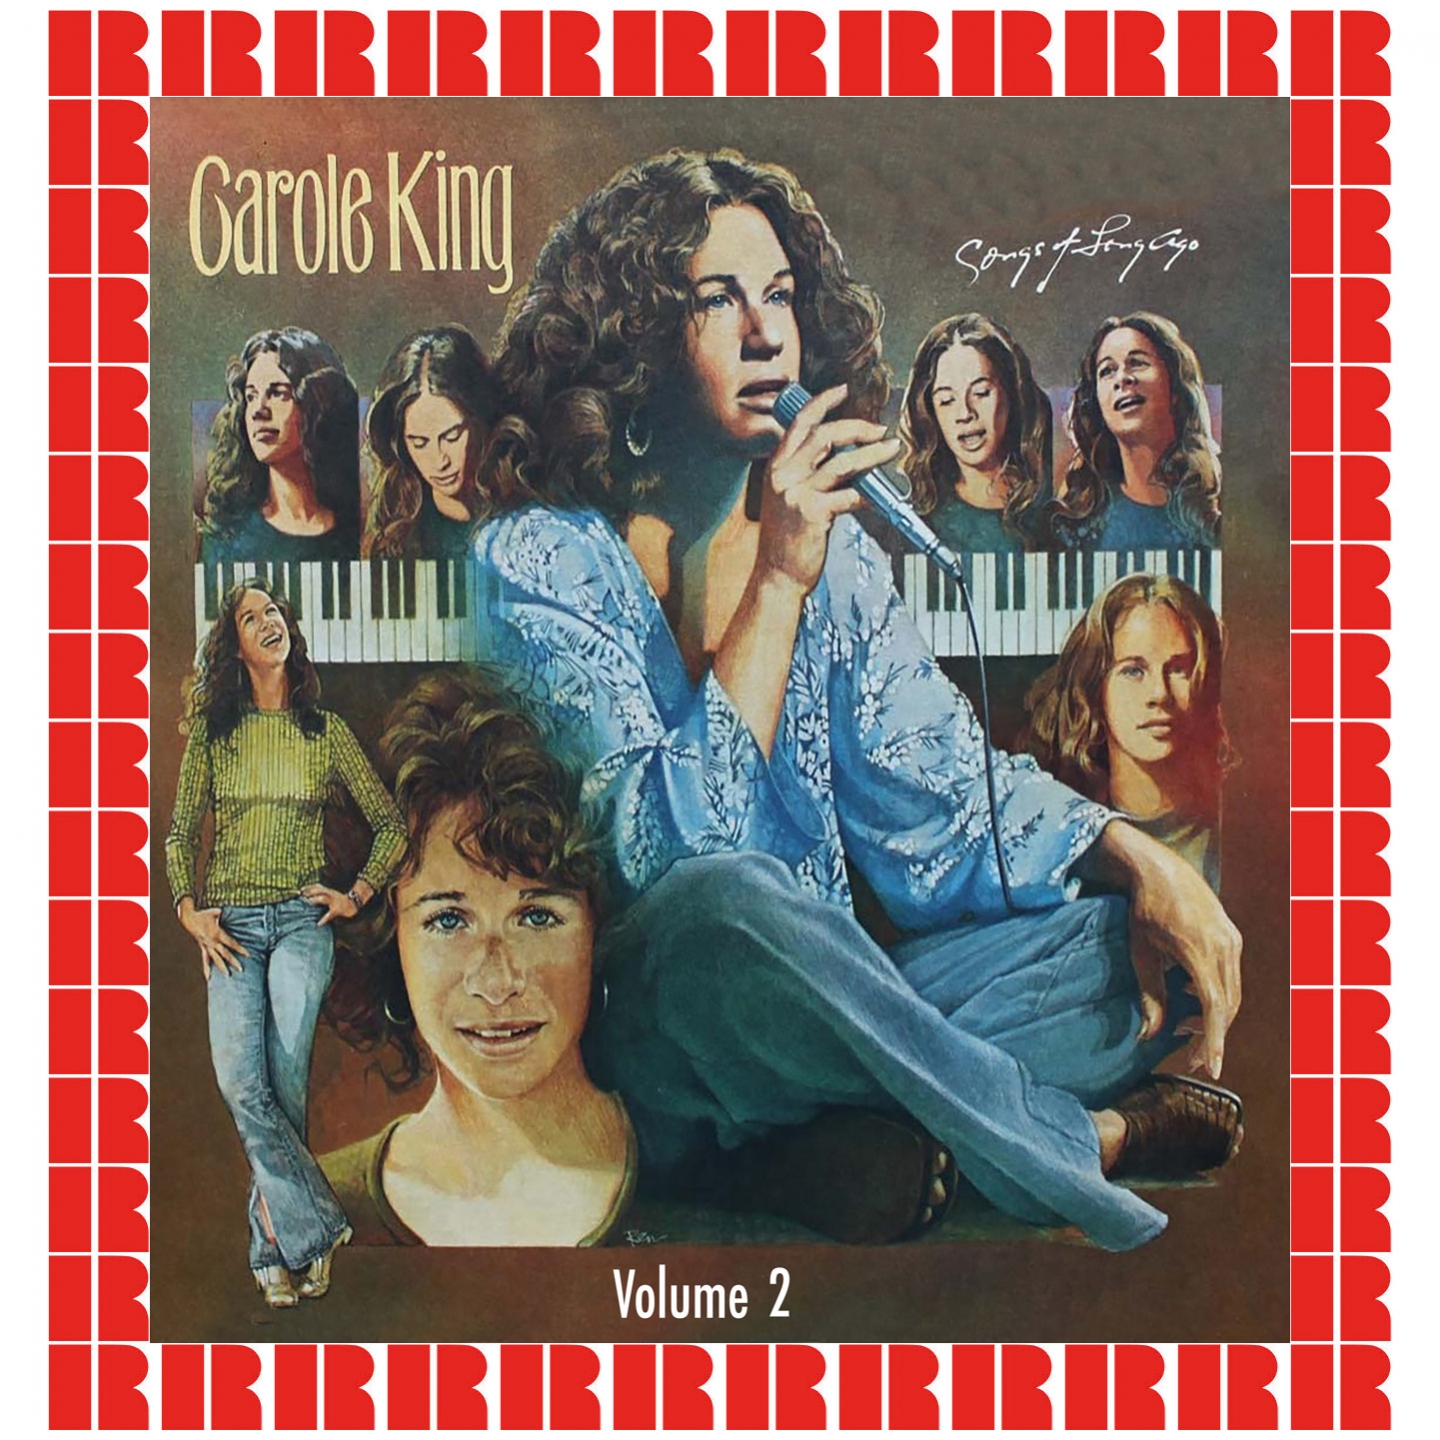 The Songs Of Carole King, Vol. 2